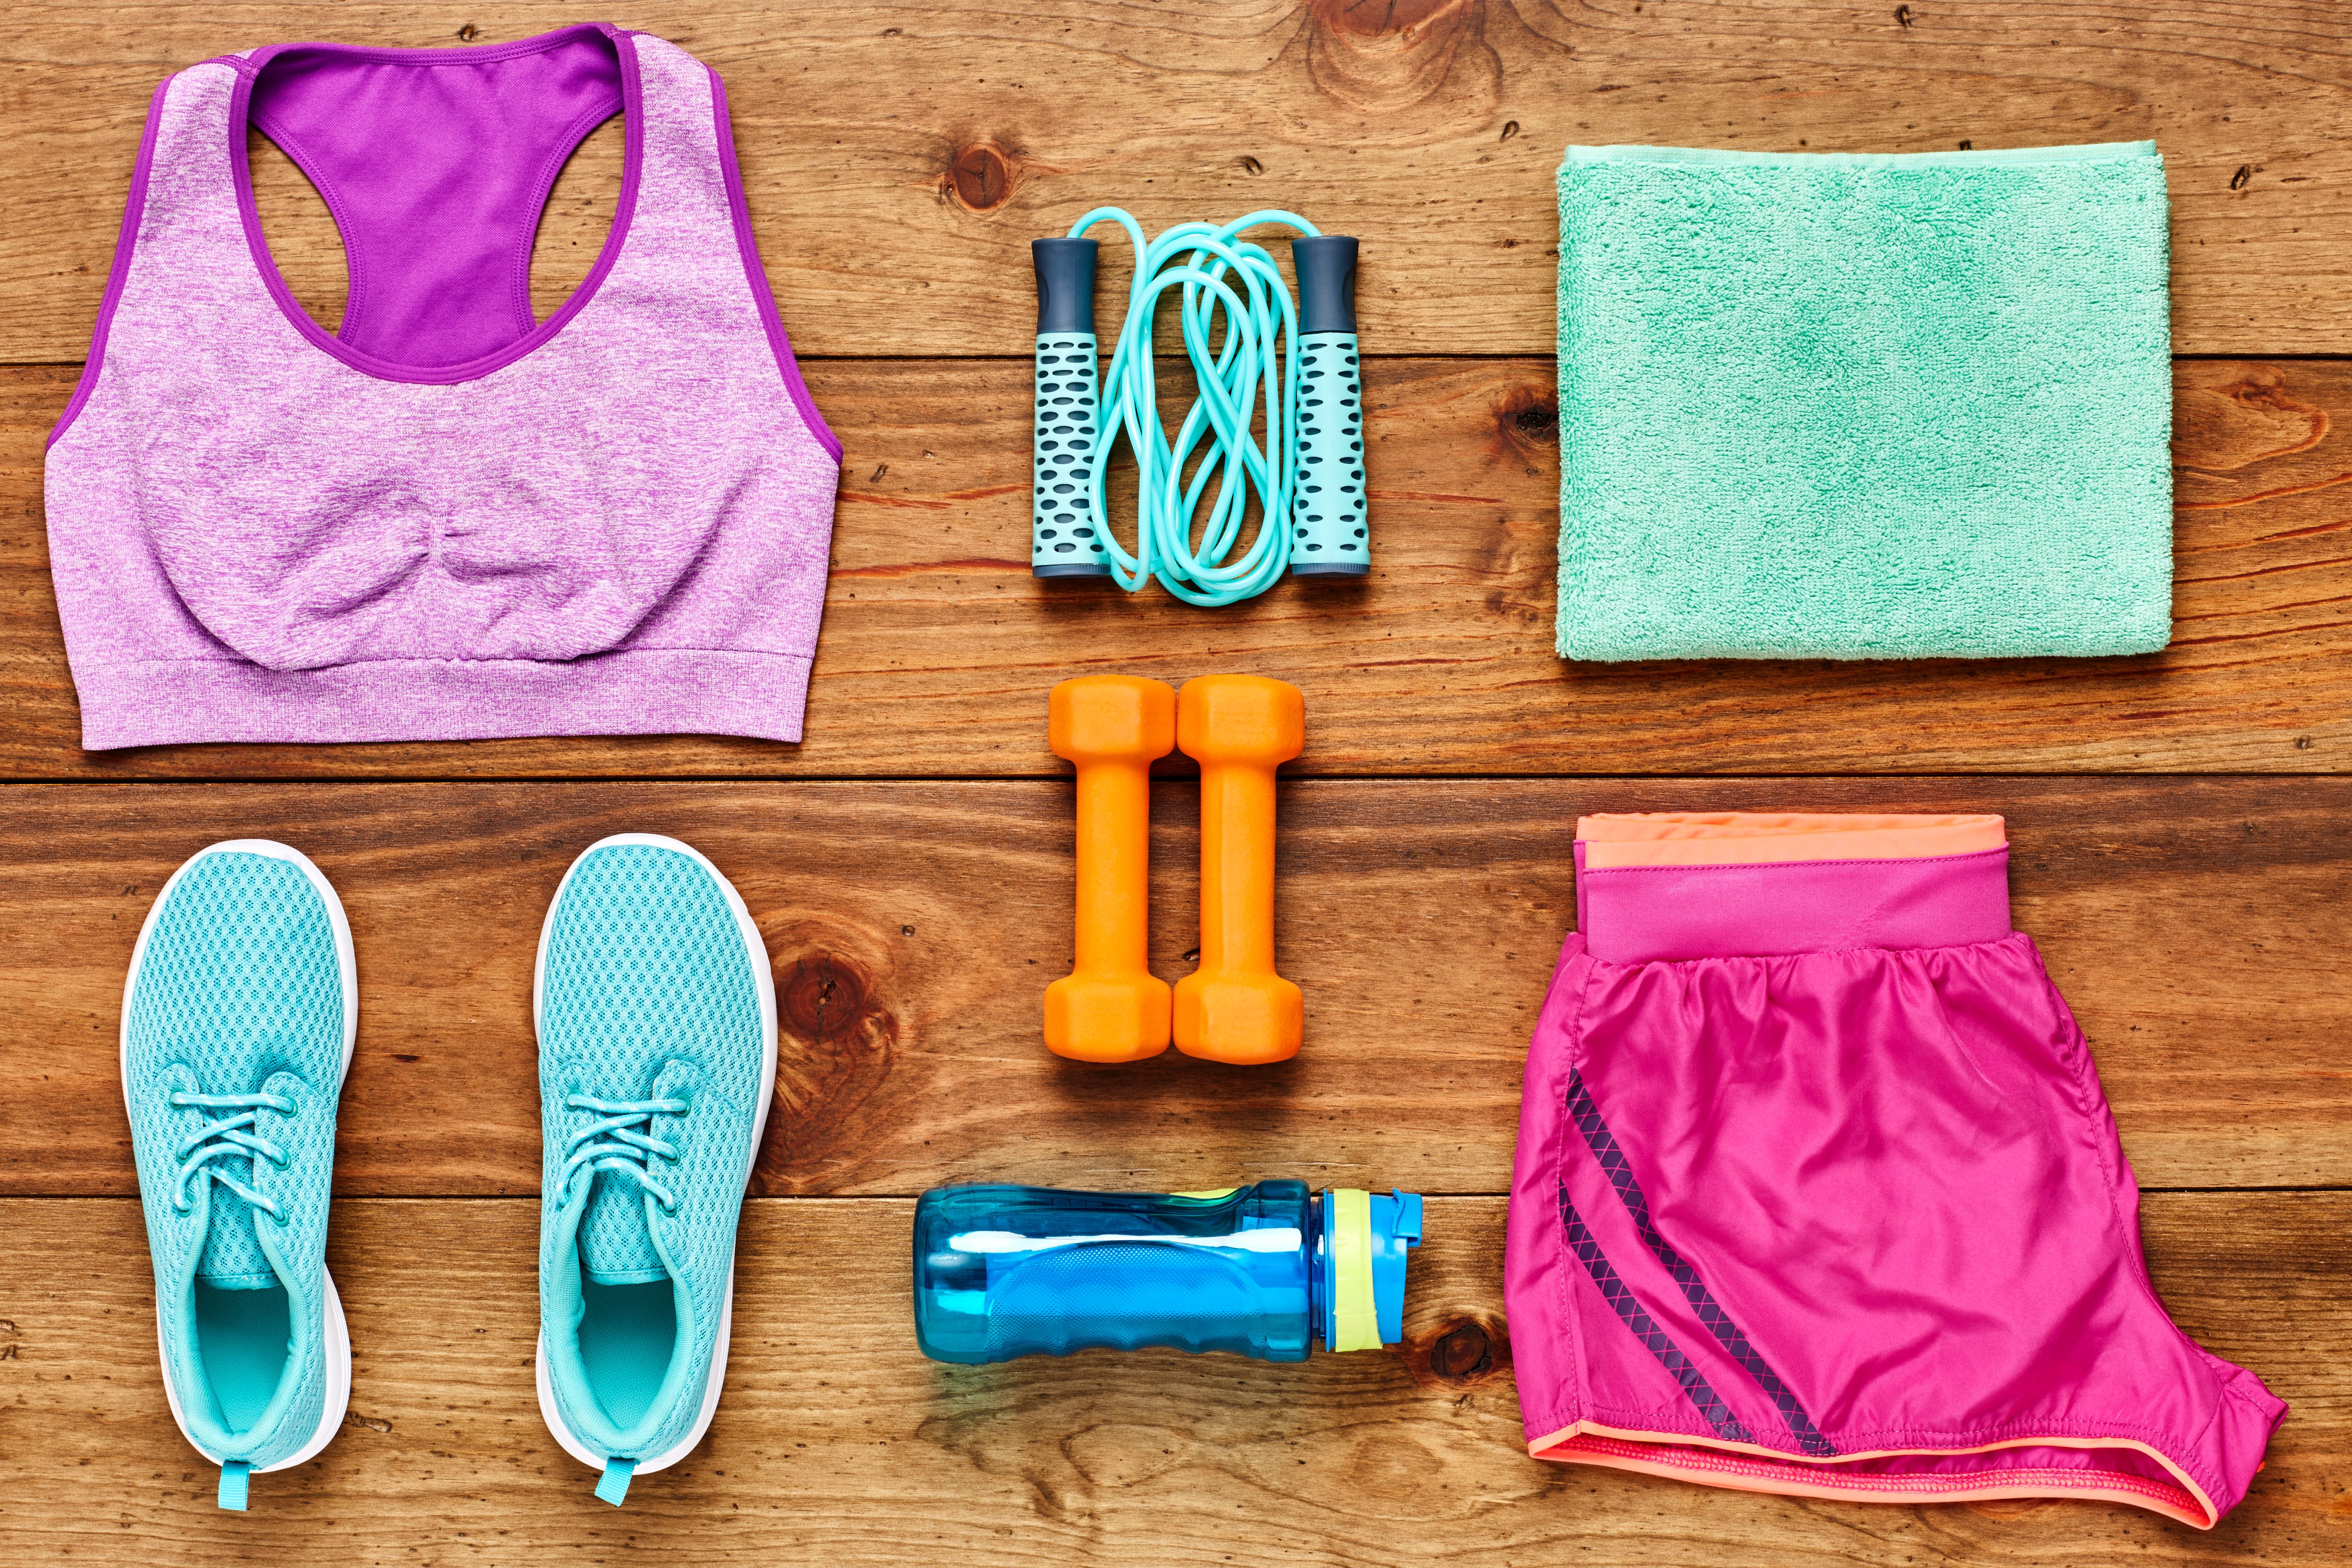 Directly above flat lay shot of sports equipment arranged on hardwood floor. Dumbbells are surrounded with sports clothing  water bottle  towel and shoes on wood. All are representing healthy lifestyle. (Getty Images)